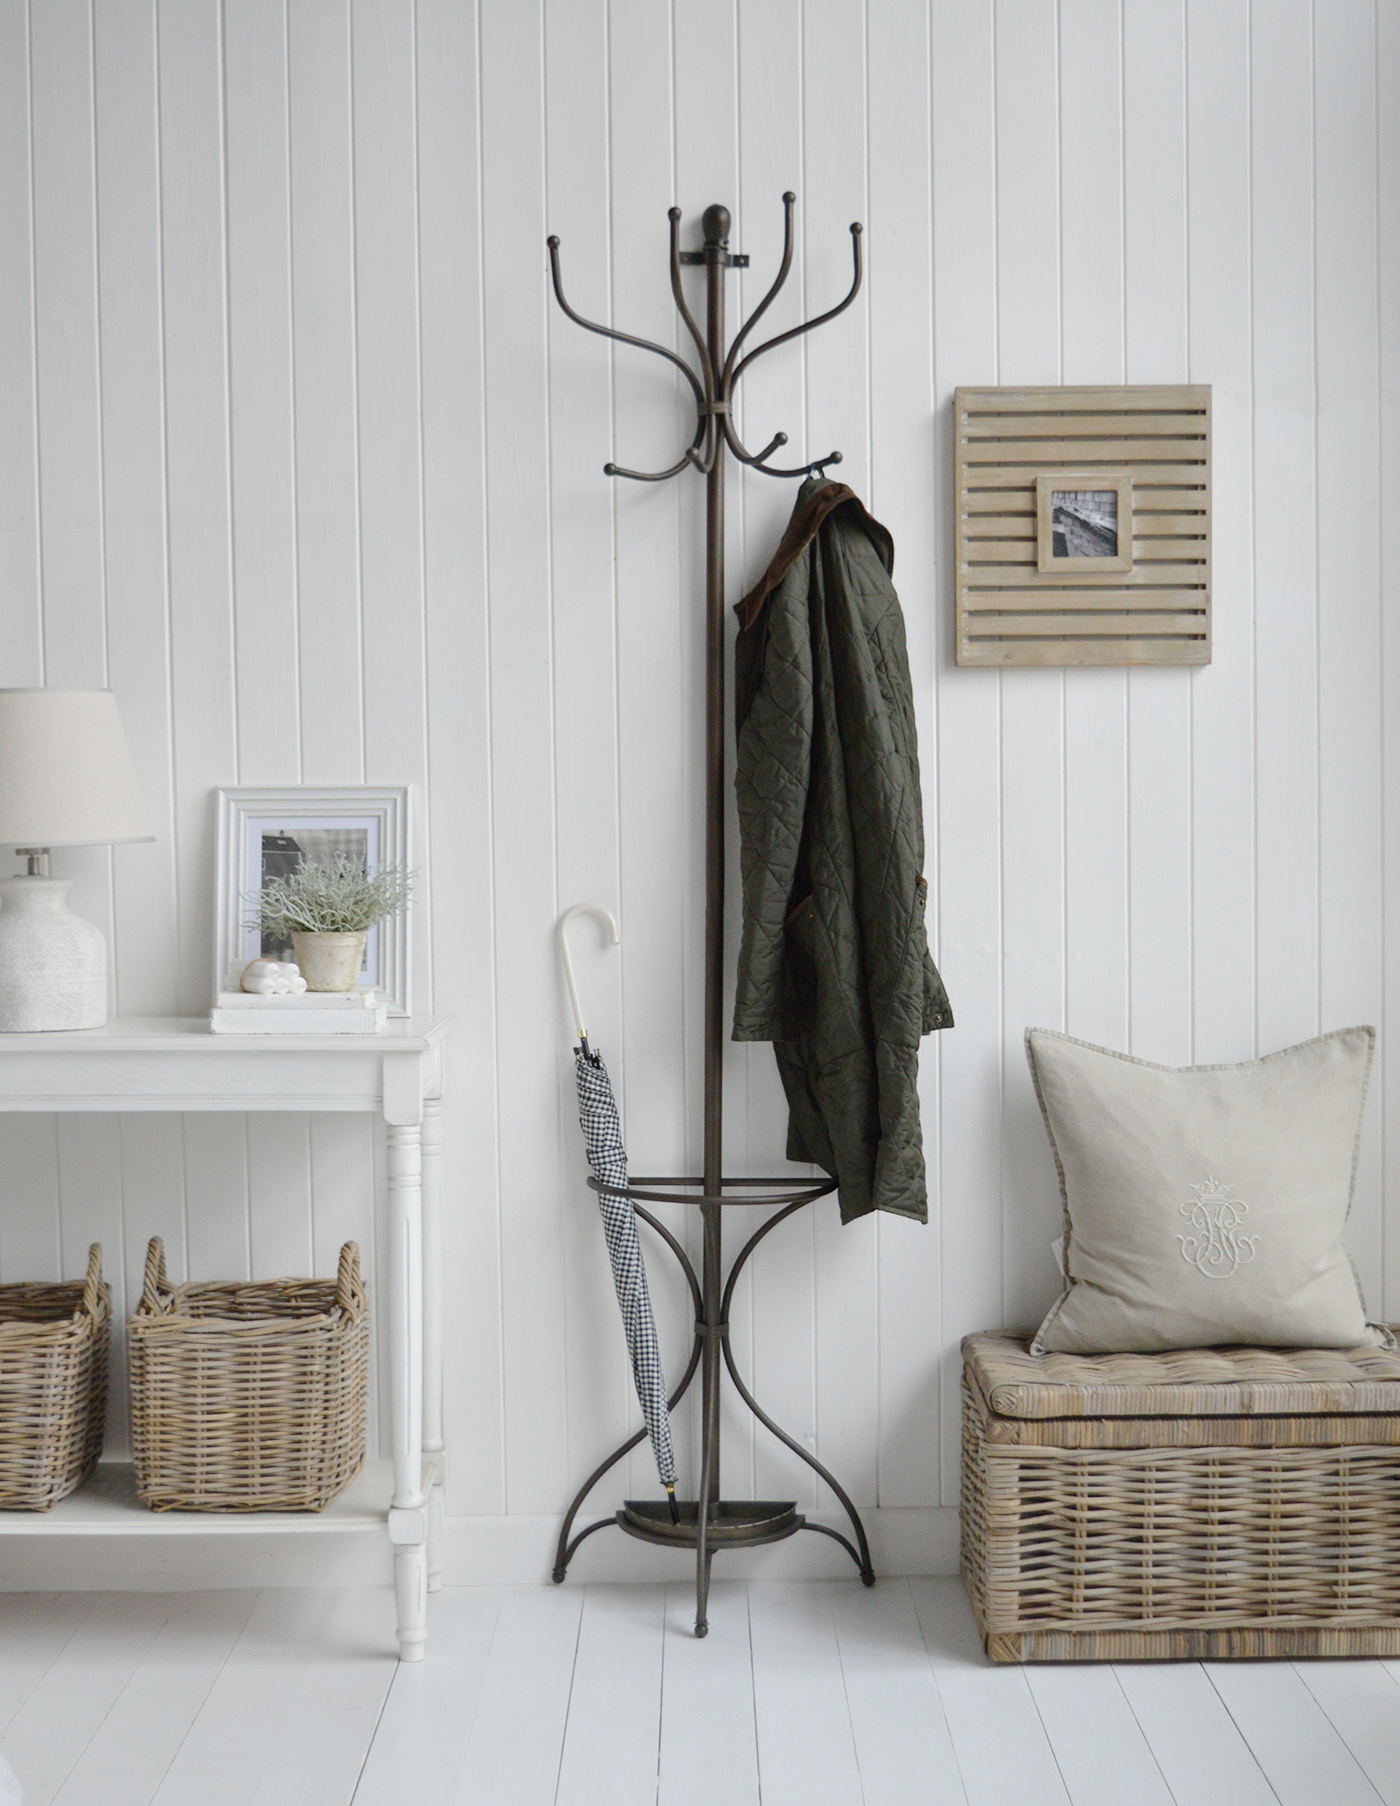 The metal wall mounted coat stand with umbrella holder for New England hallway furniture, providing a secure and organised way to hang coats, bags, or hats